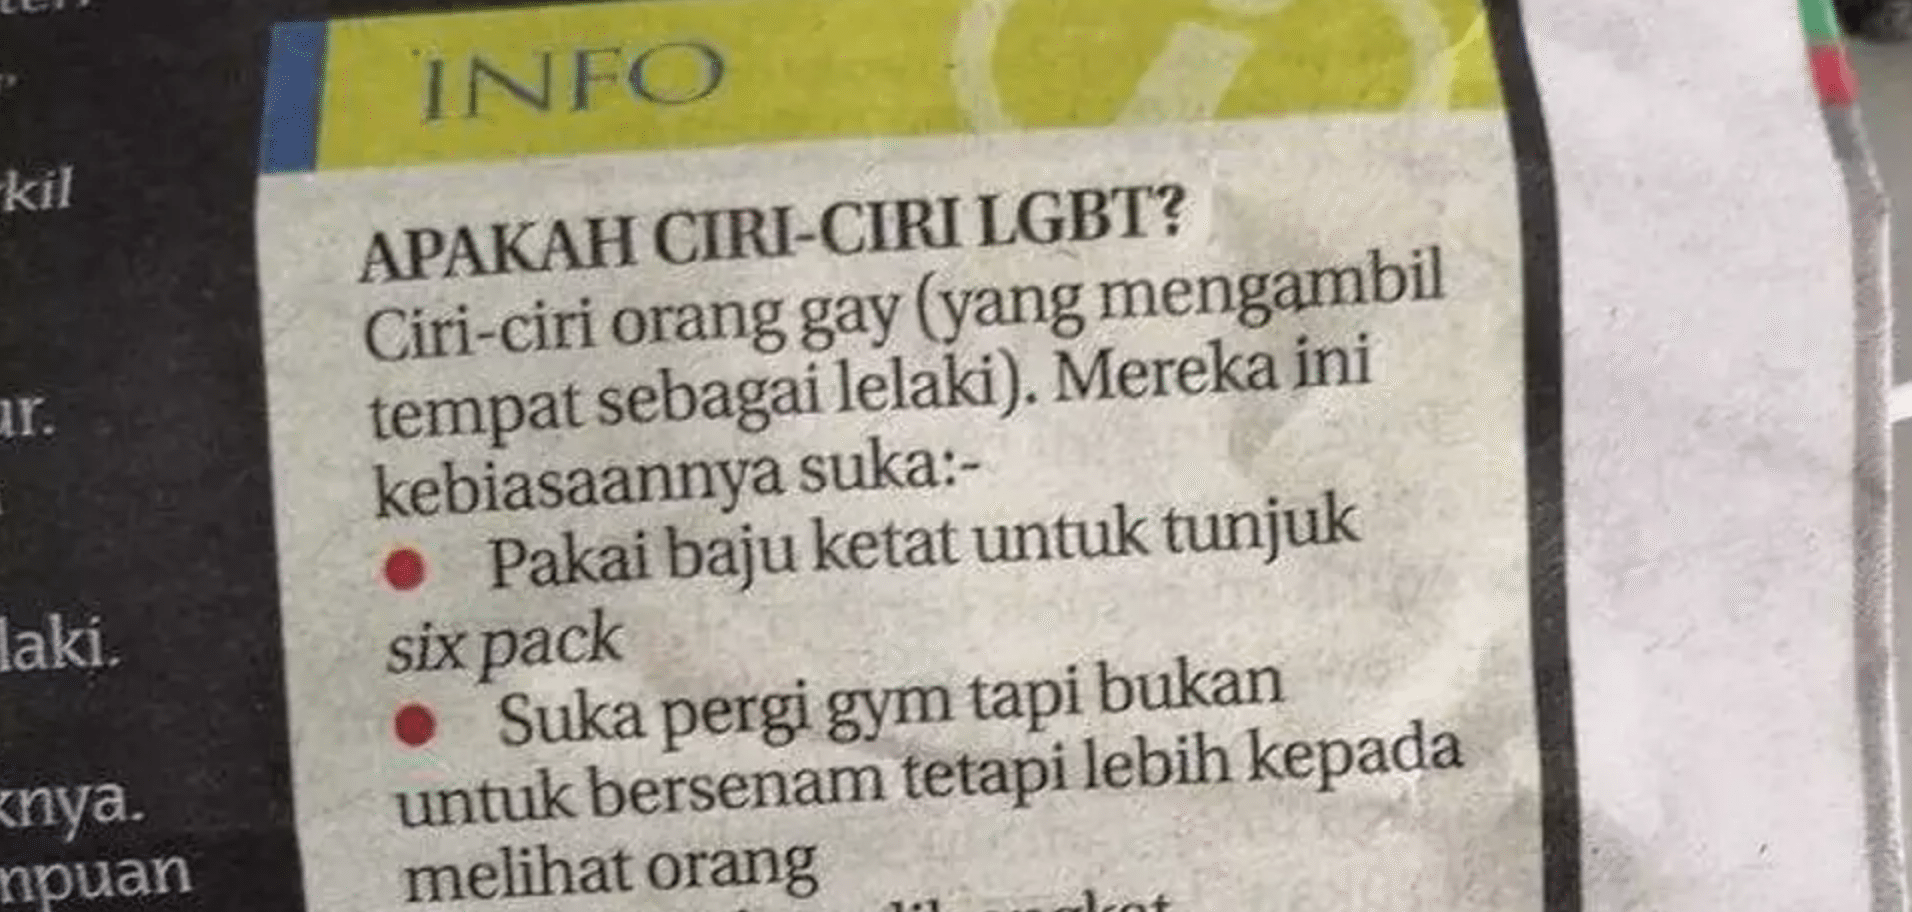 ‘How to spot a gay’ checklist published by Malaysian newspaper